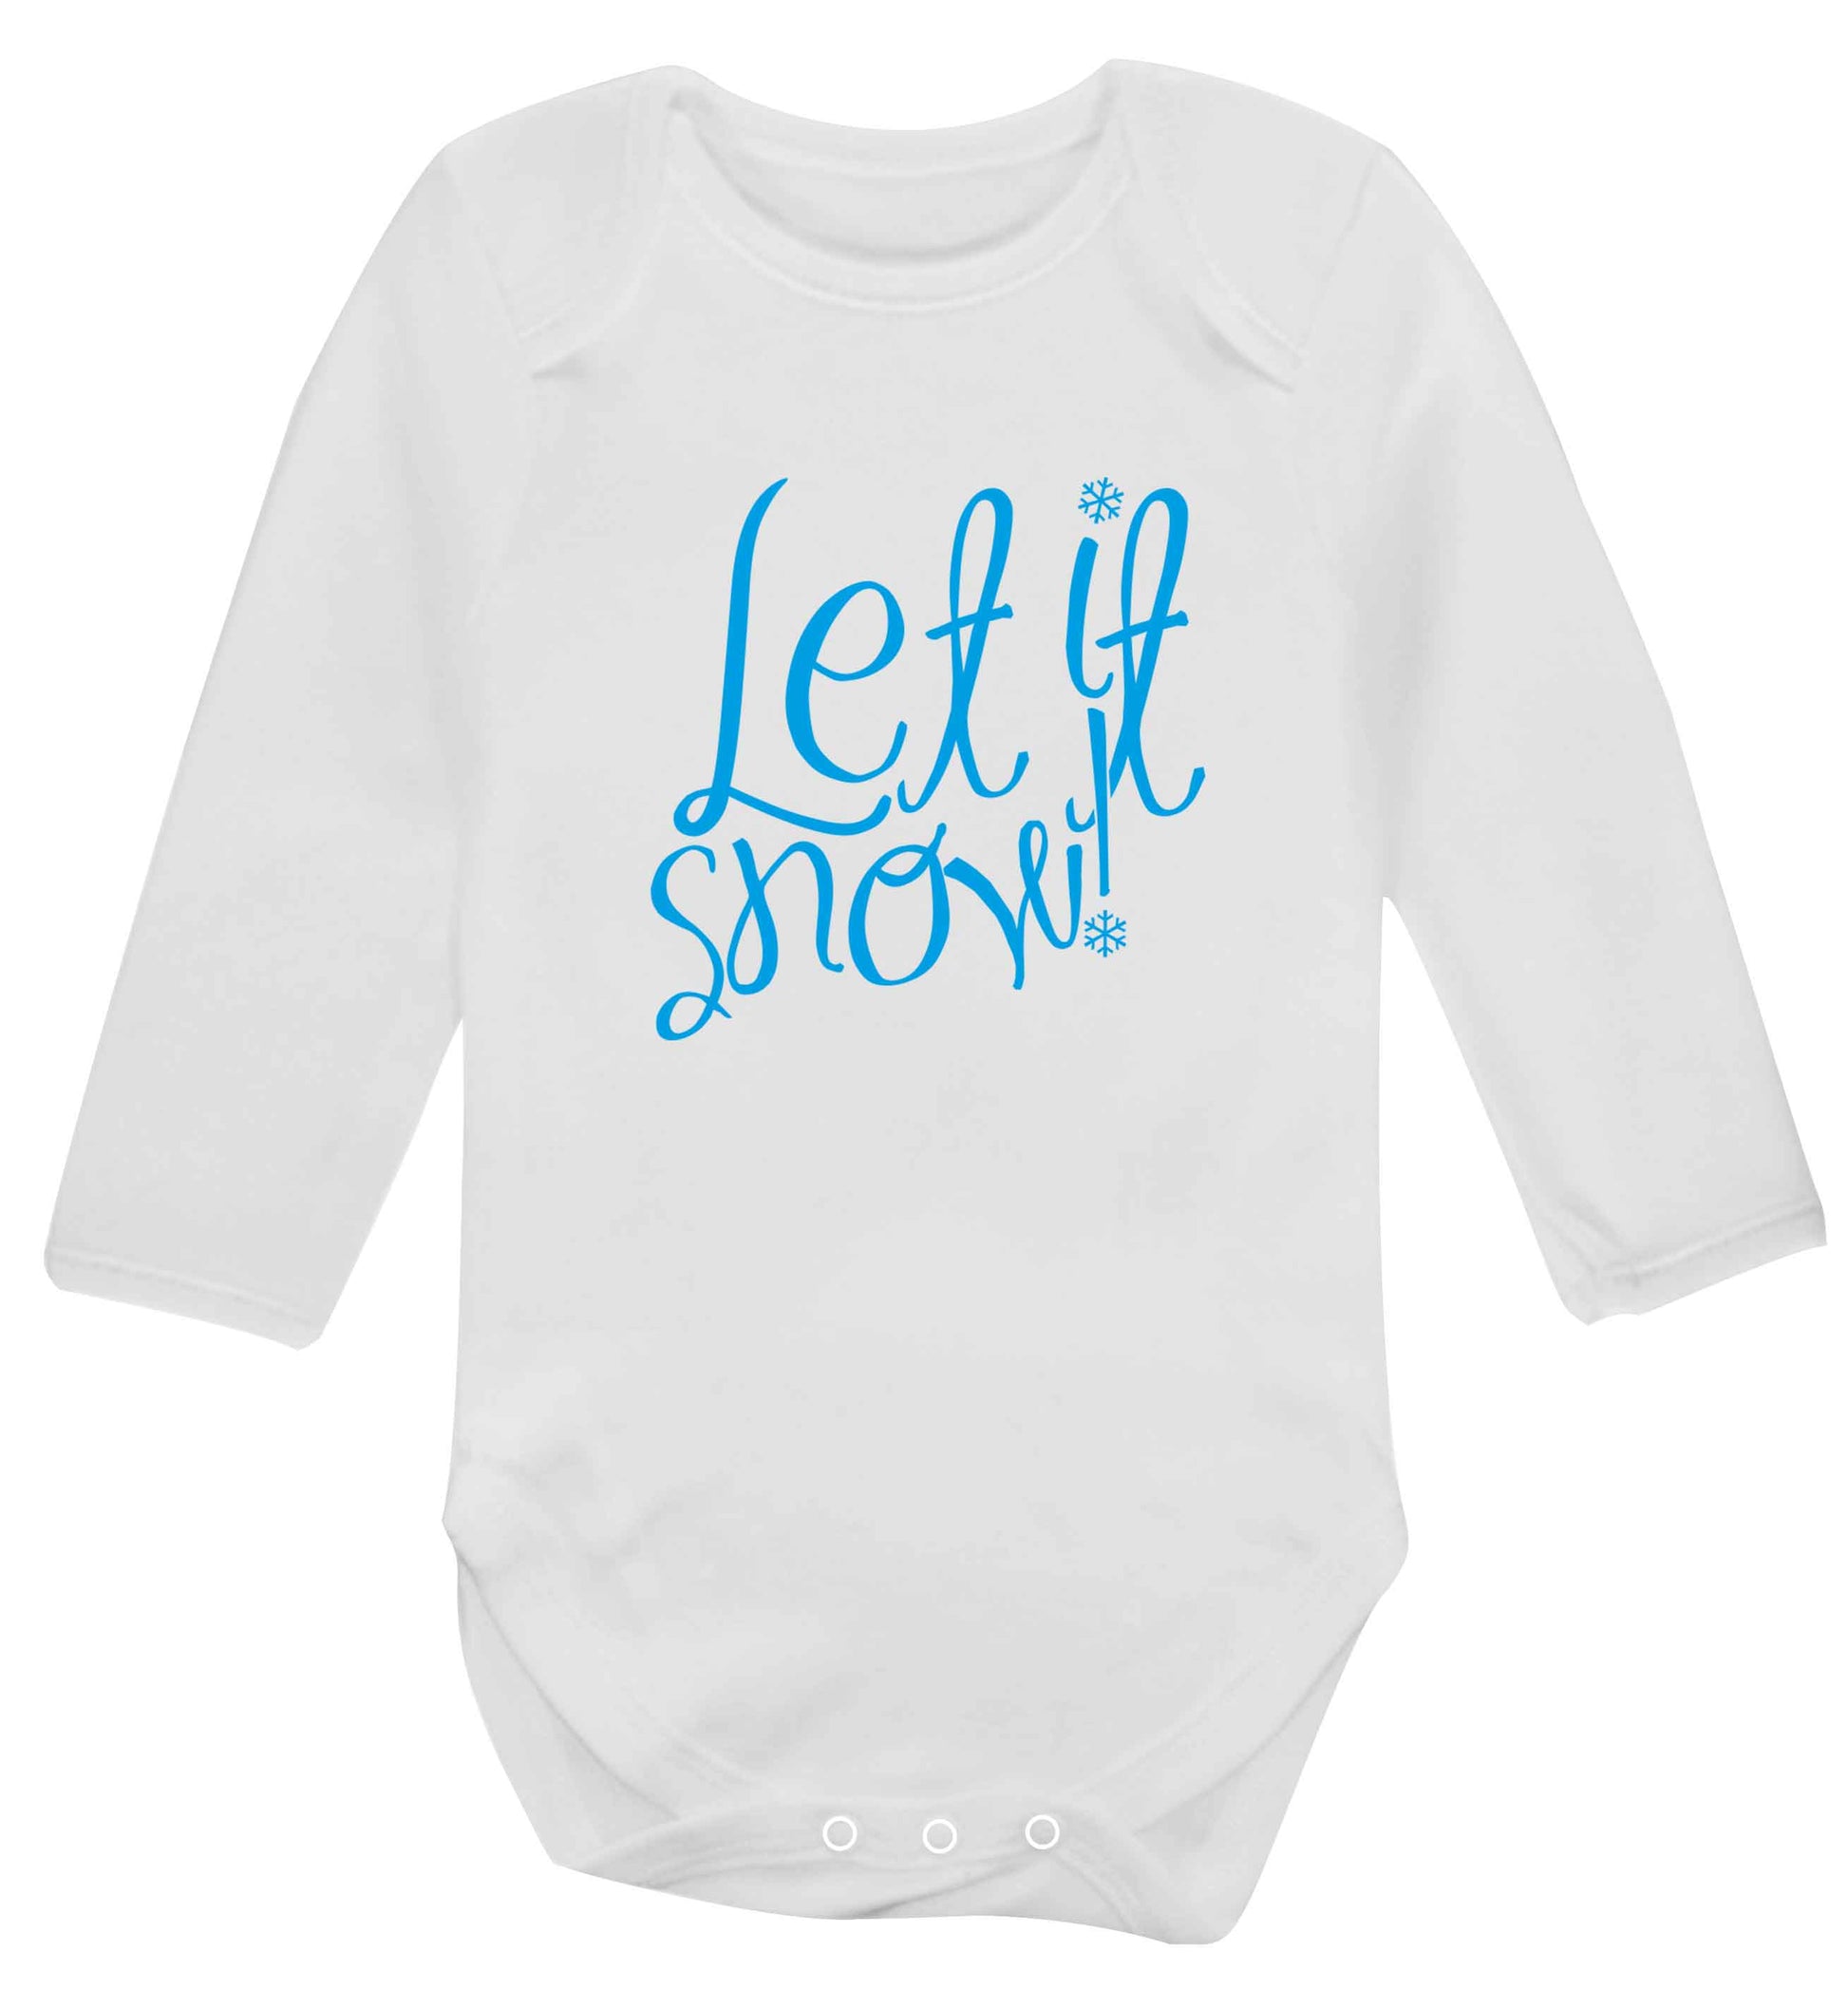 Let it snow baby vest long sleeved white 6-12 months